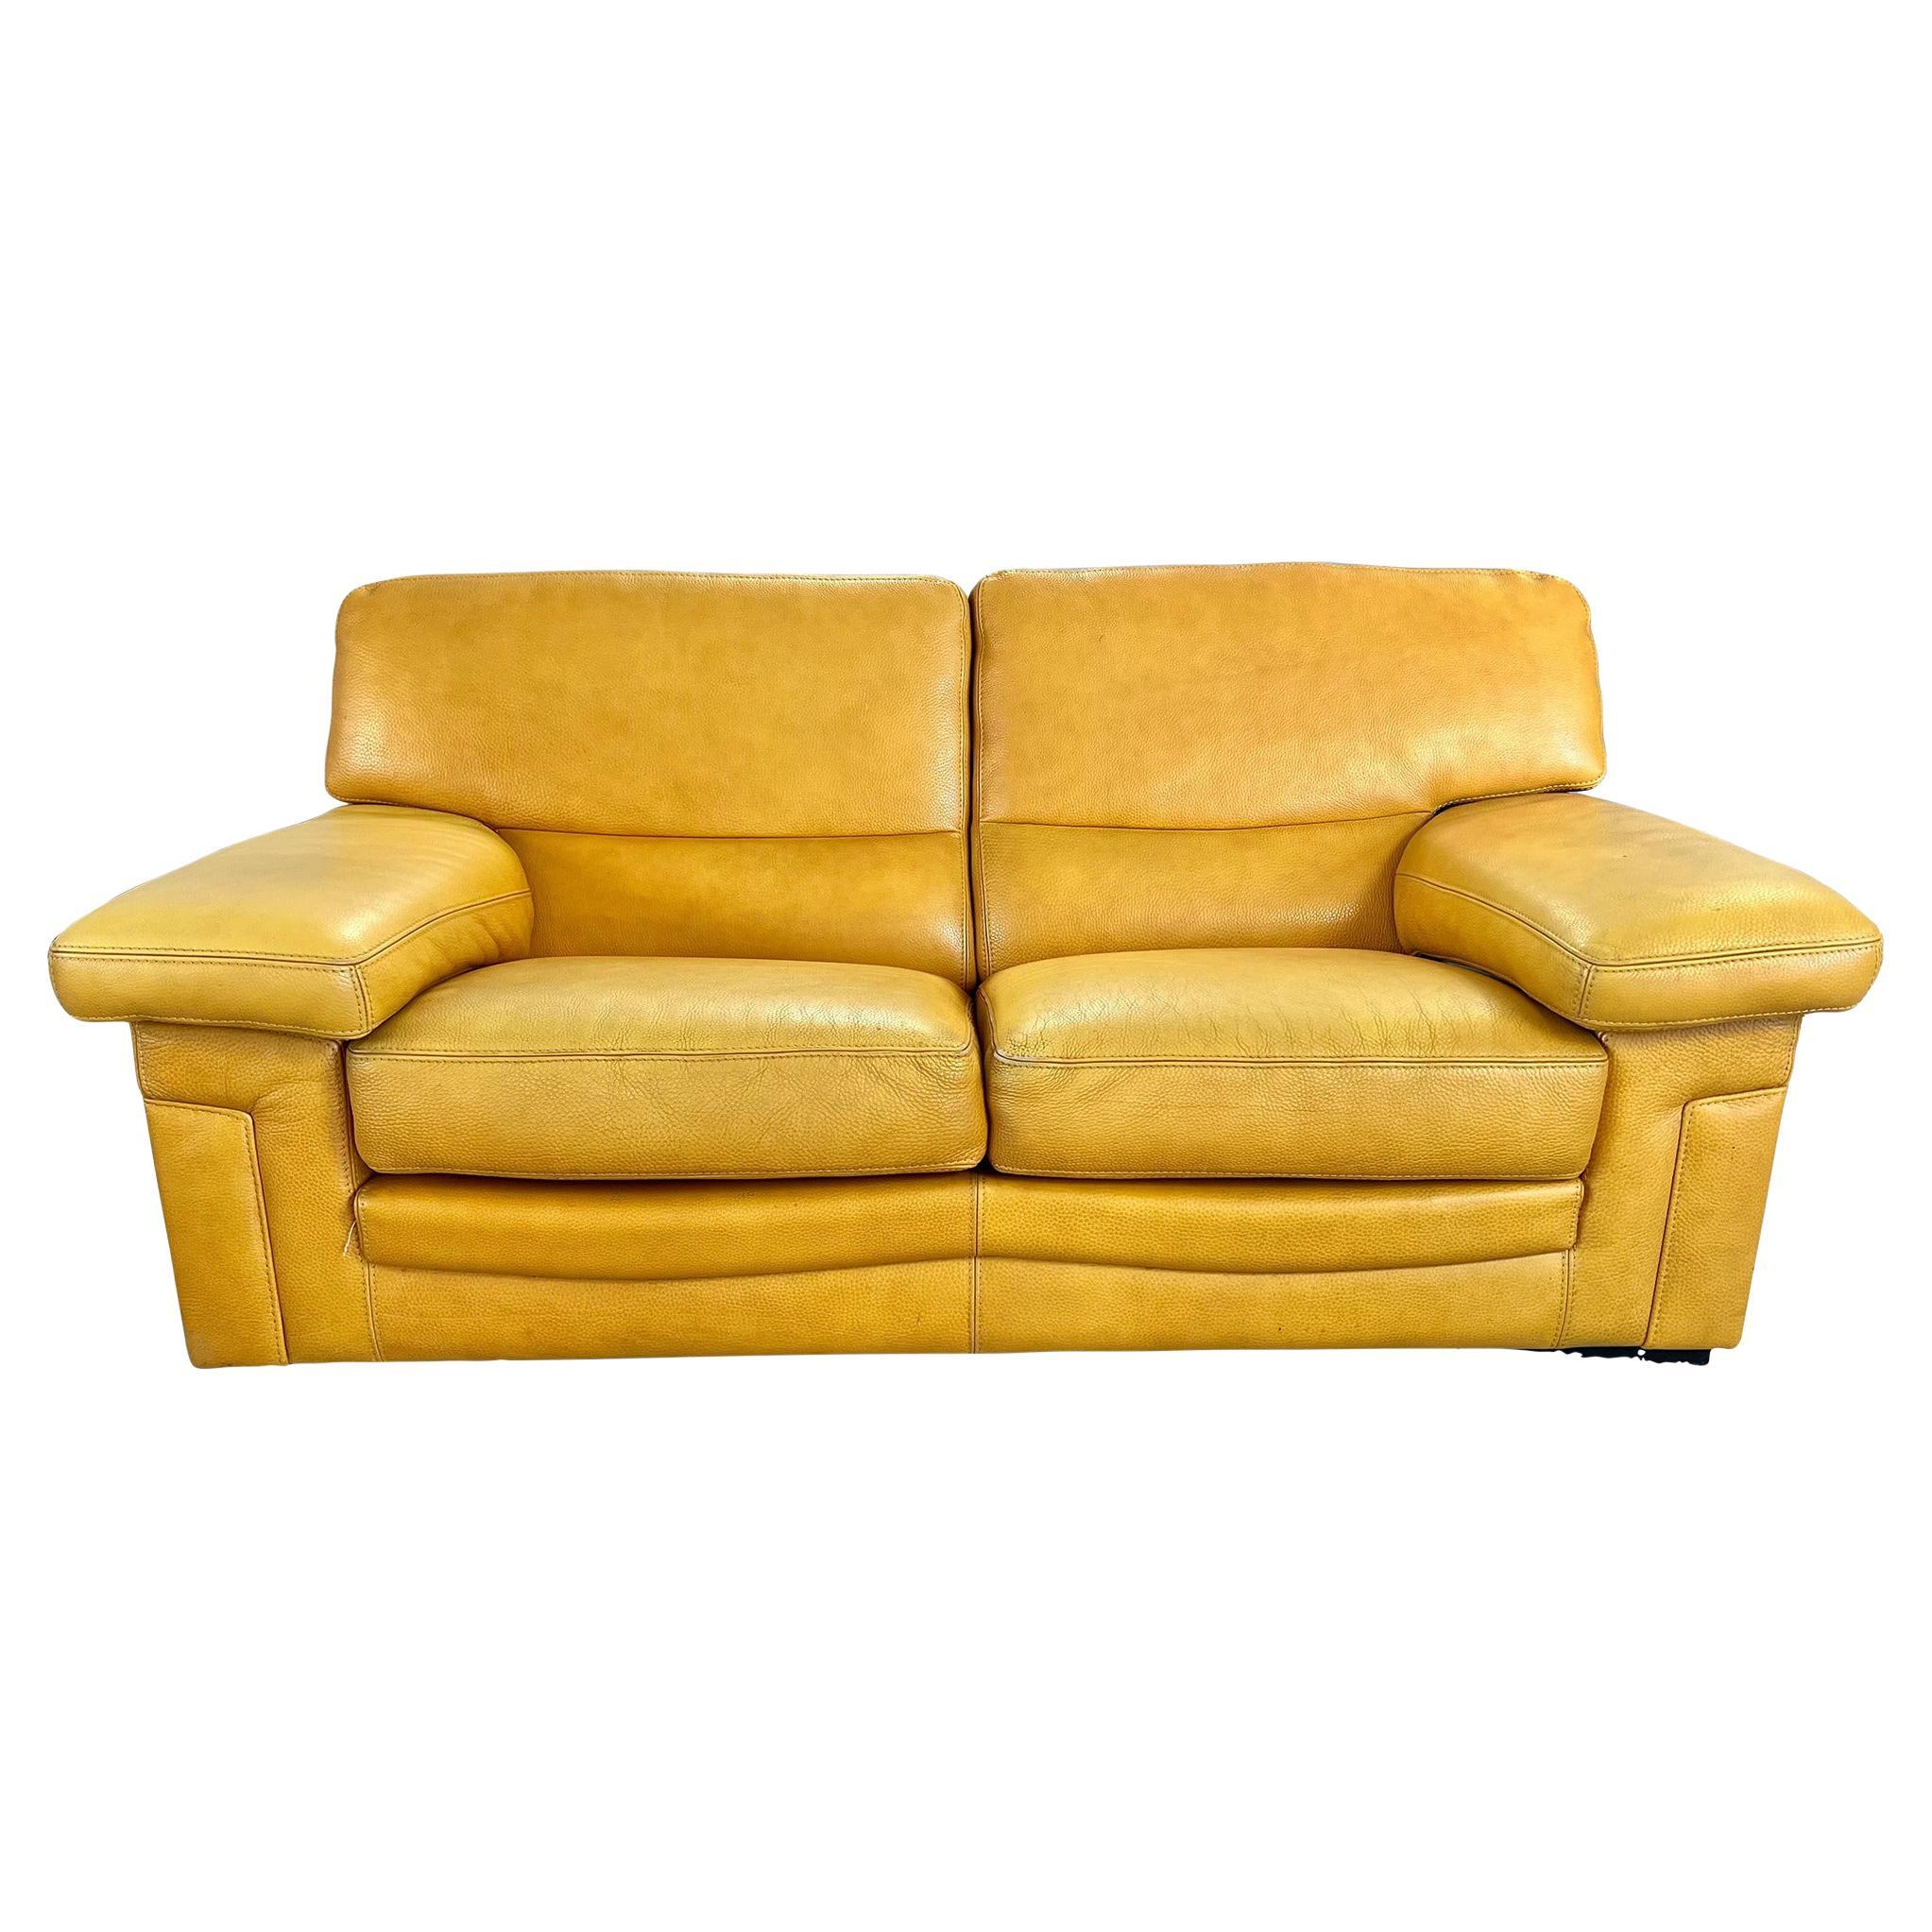 Original Vintage Modern Yellow Leather Sofa Lounger by Roche Bobois, Stamped